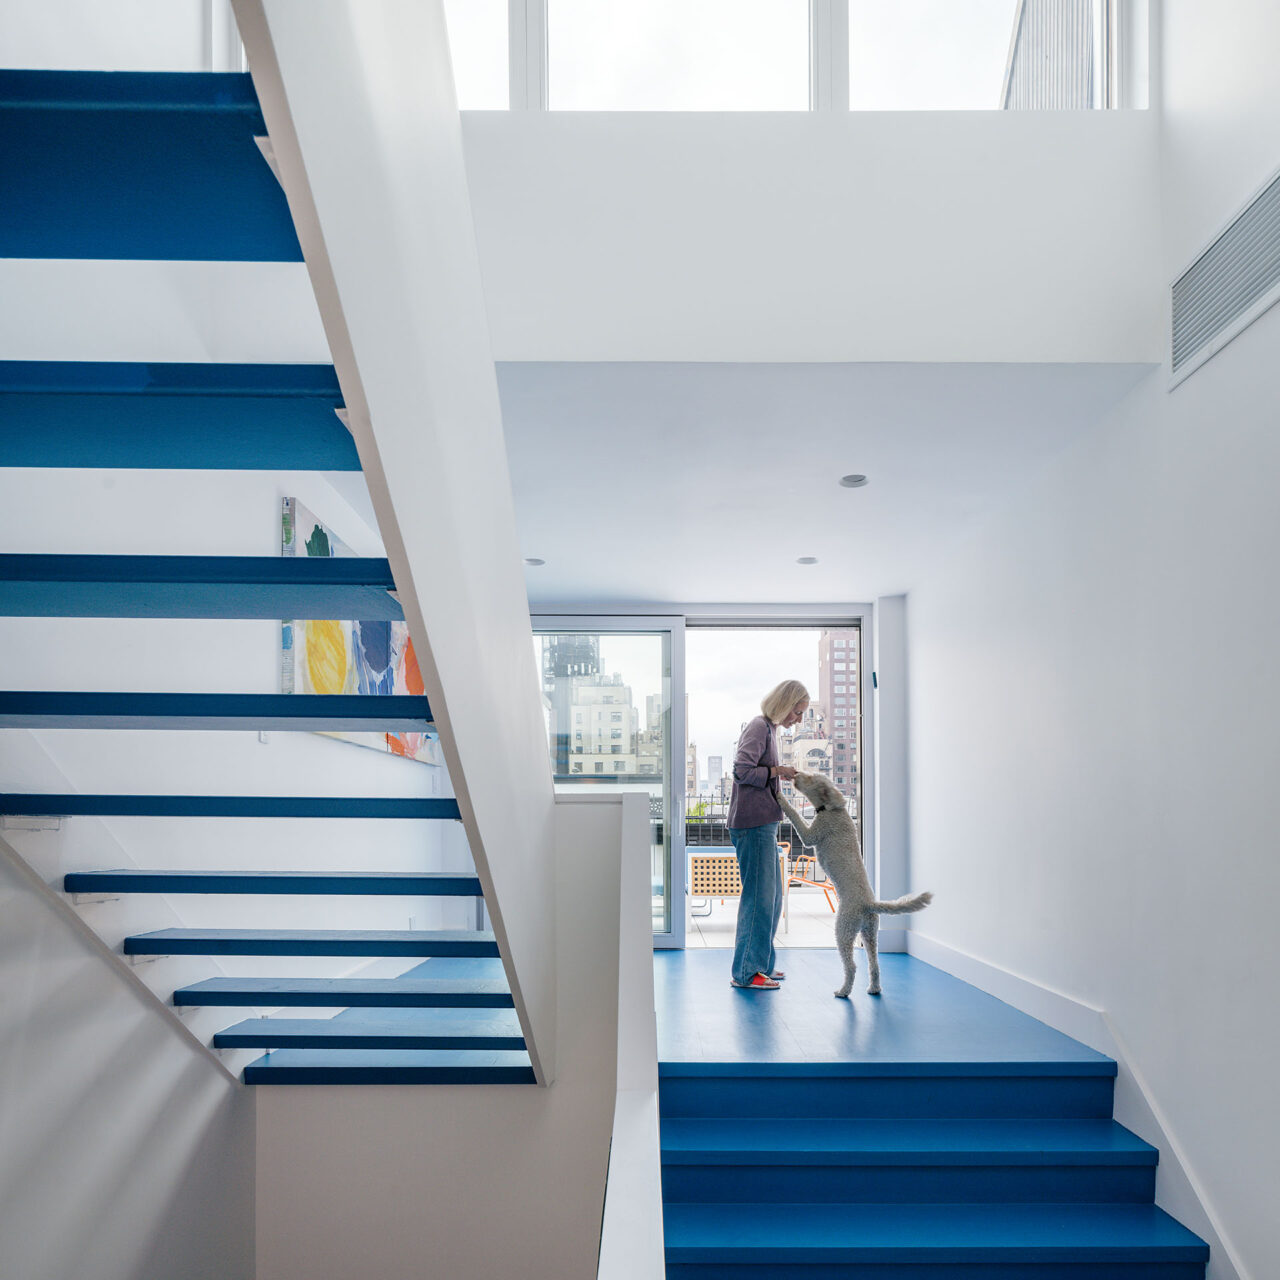 A blue staircase brings a pop of color to the white walls